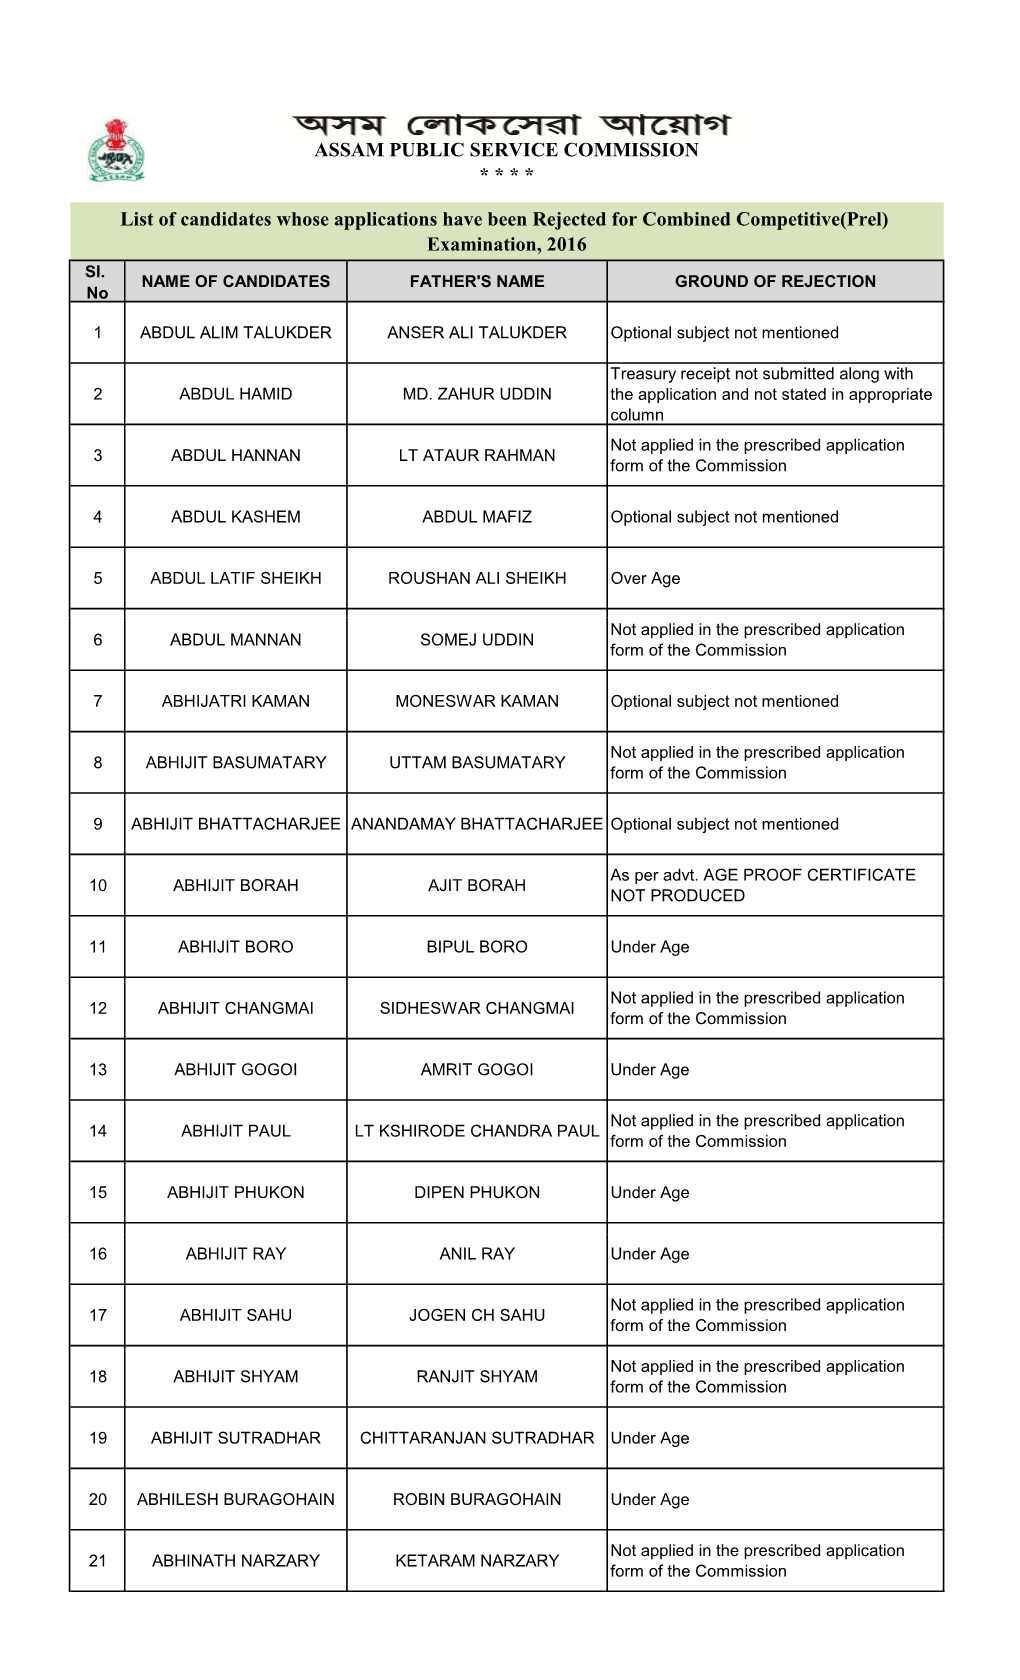 List of Candidates Whose Applications Have Been Rejected for Combined Competitive(Prel) Examination, 2016 Sl